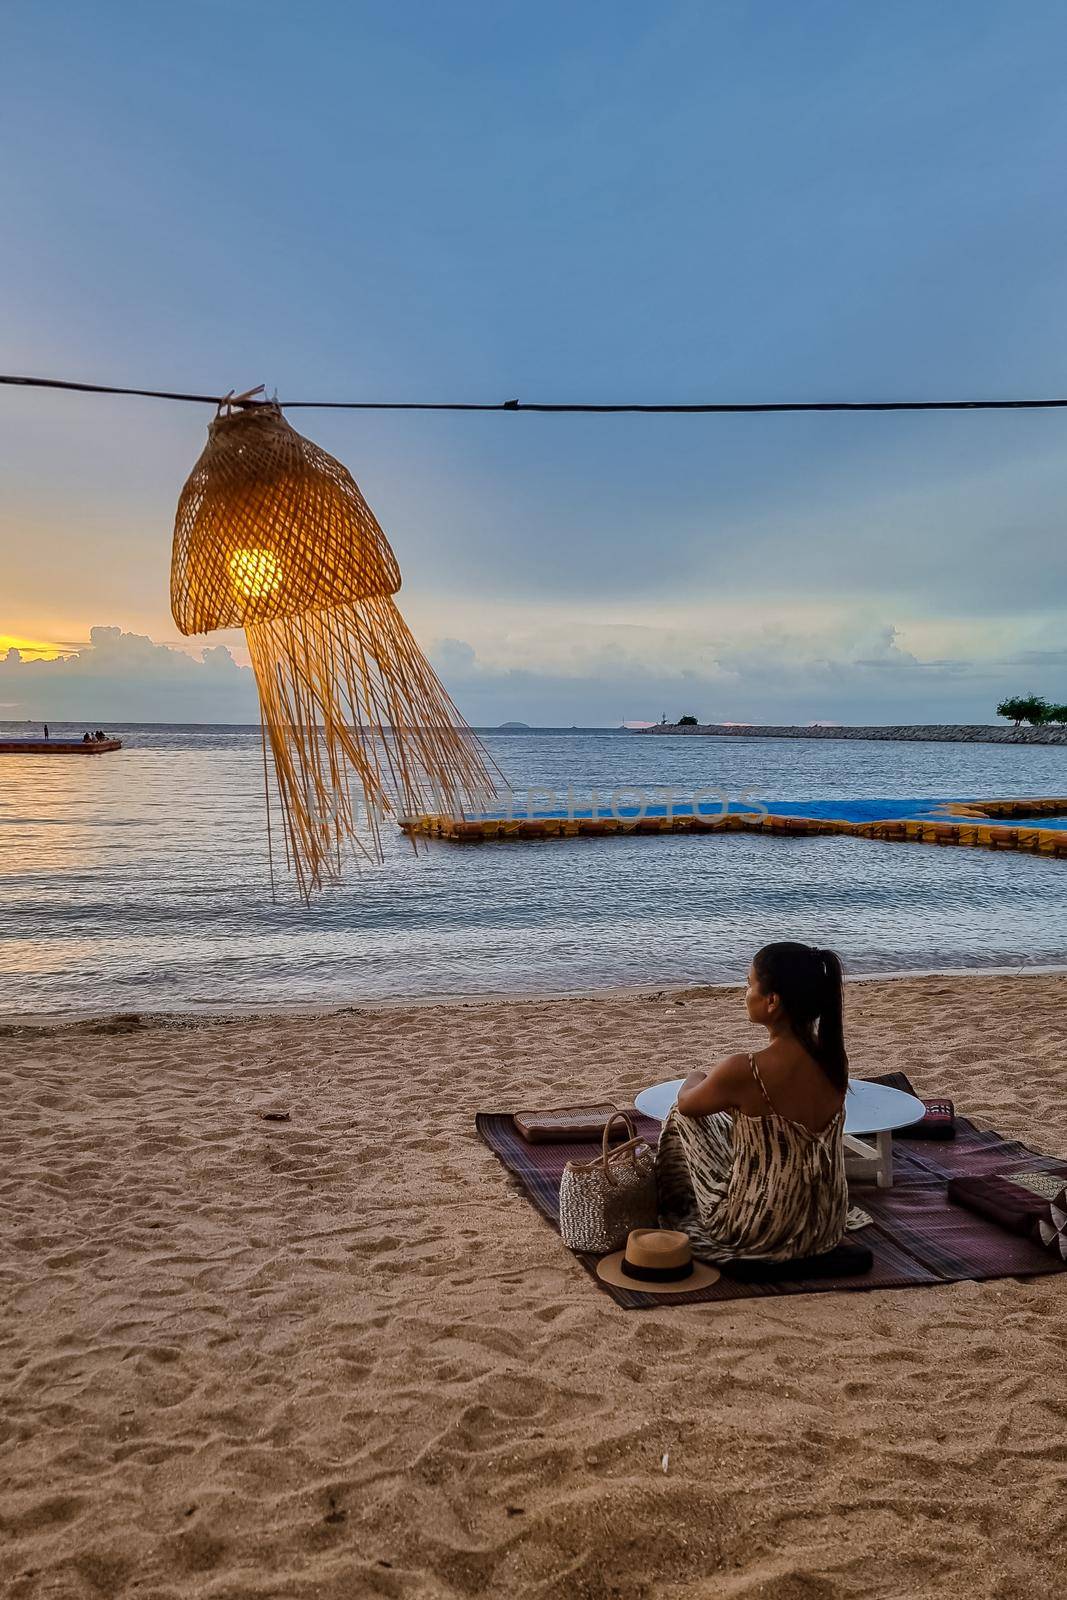 women bbq cooking noodle soup during sunset in Thailand Ban Amphur beach. relaxing with bbq Thai traditional on a tropical beach with palm trees and hammock during sunset